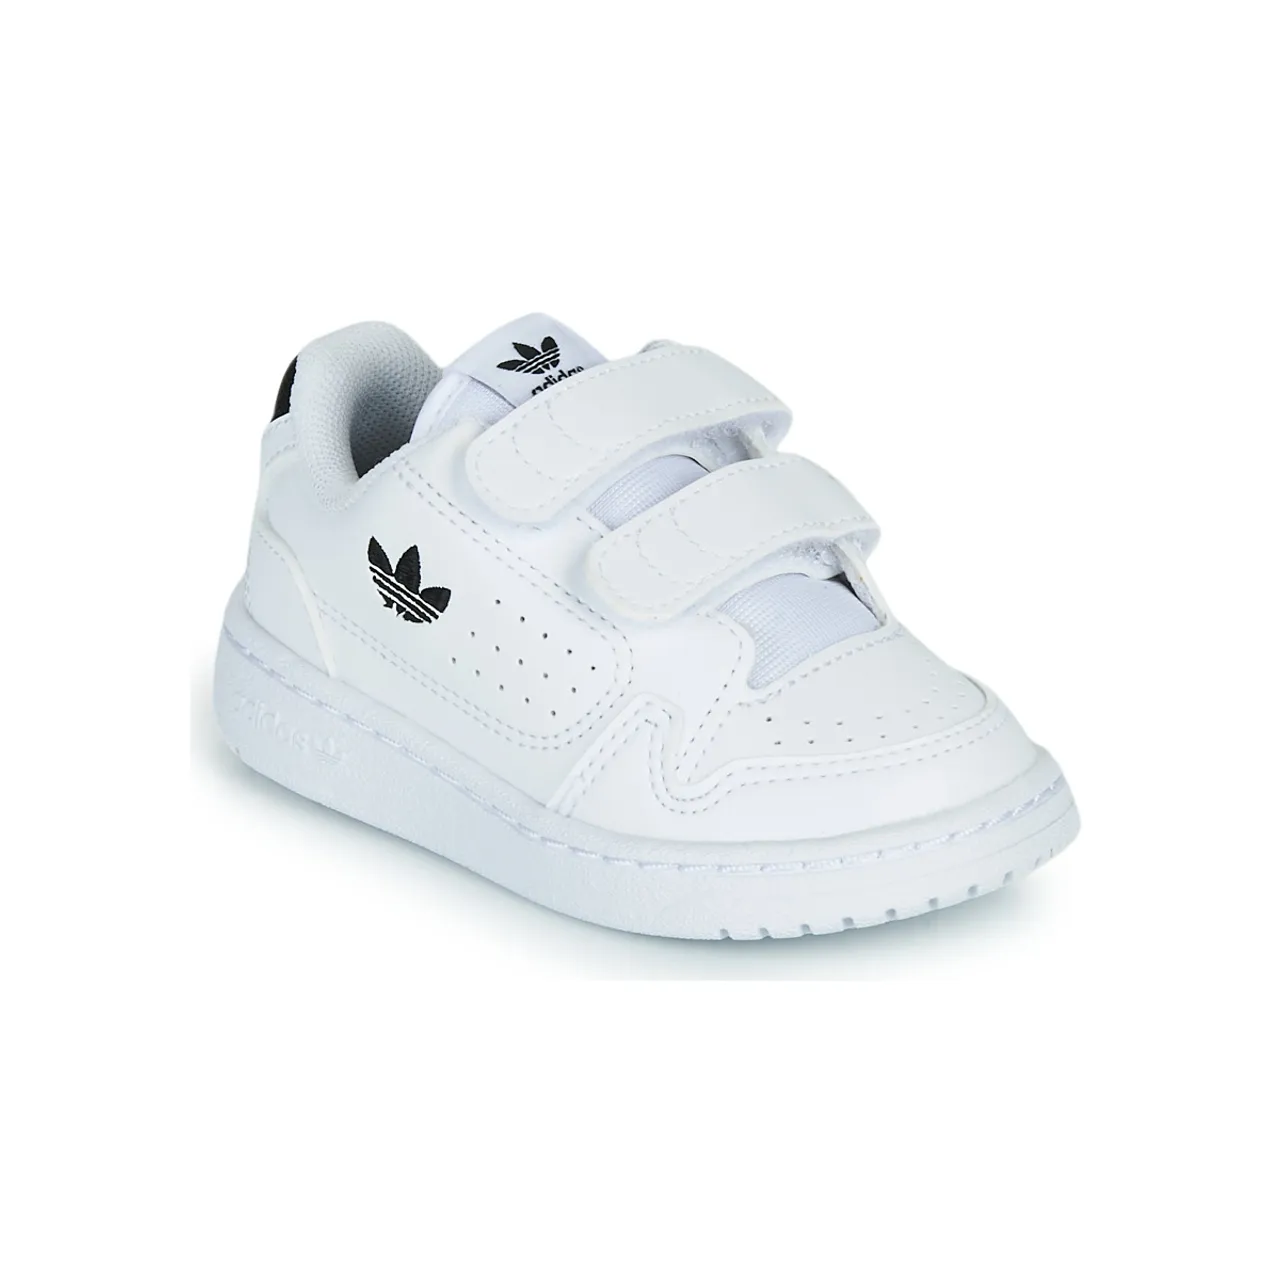 adidas  NY 92 CF I  boys's Children's Shoes (Trainers) in White